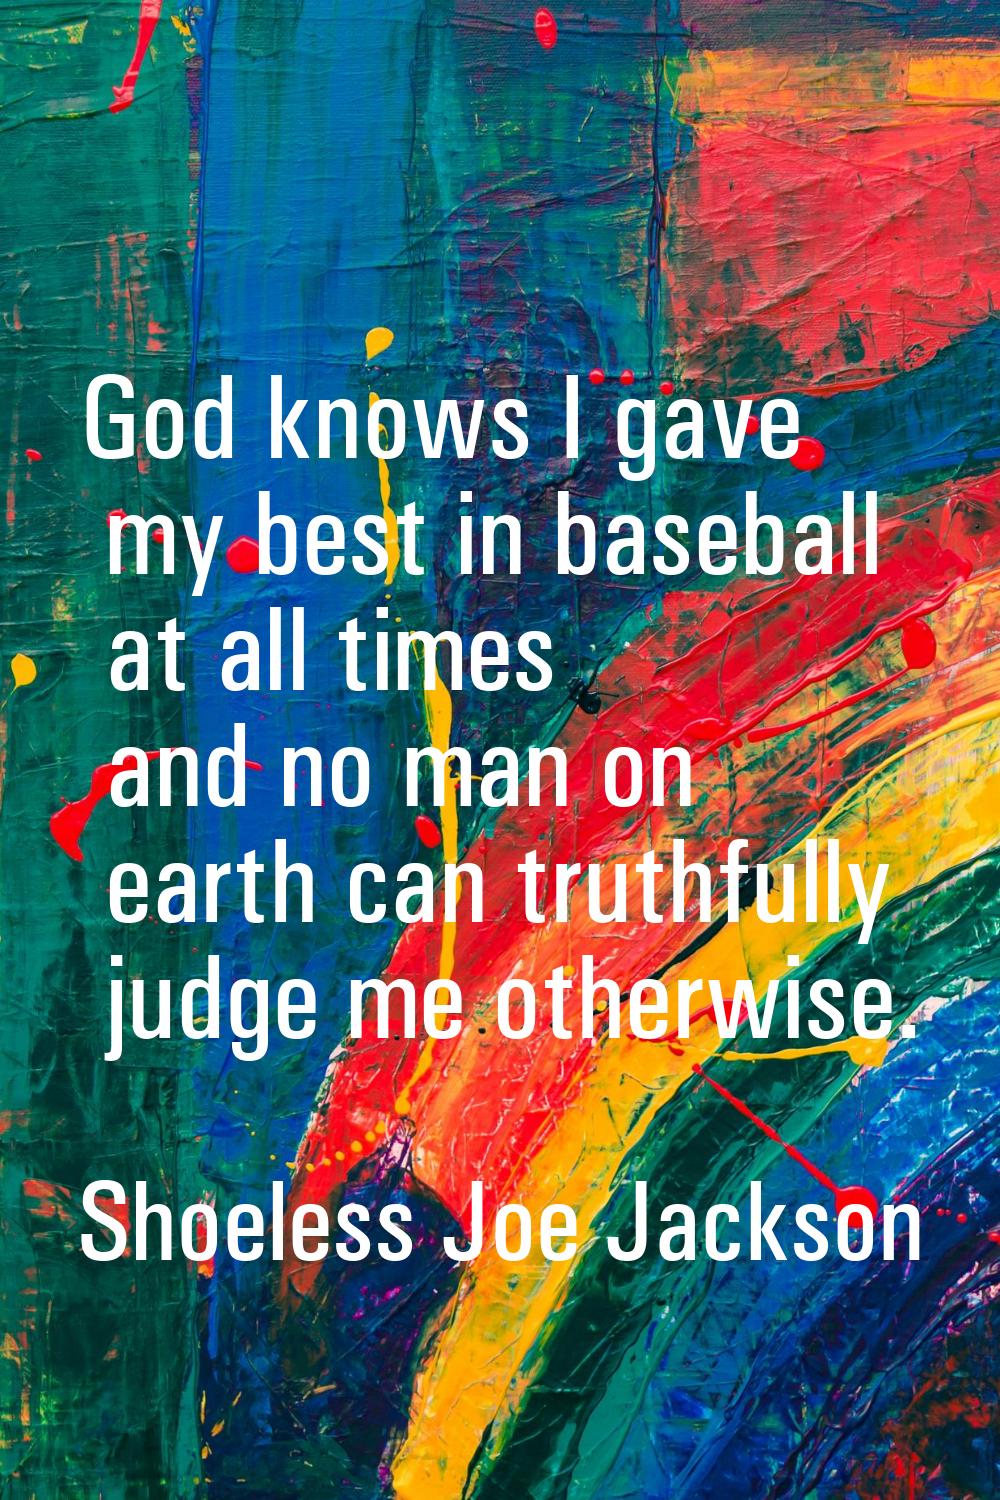 God knows I gave my best in baseball at all times and no man on earth can truthfully judge me other